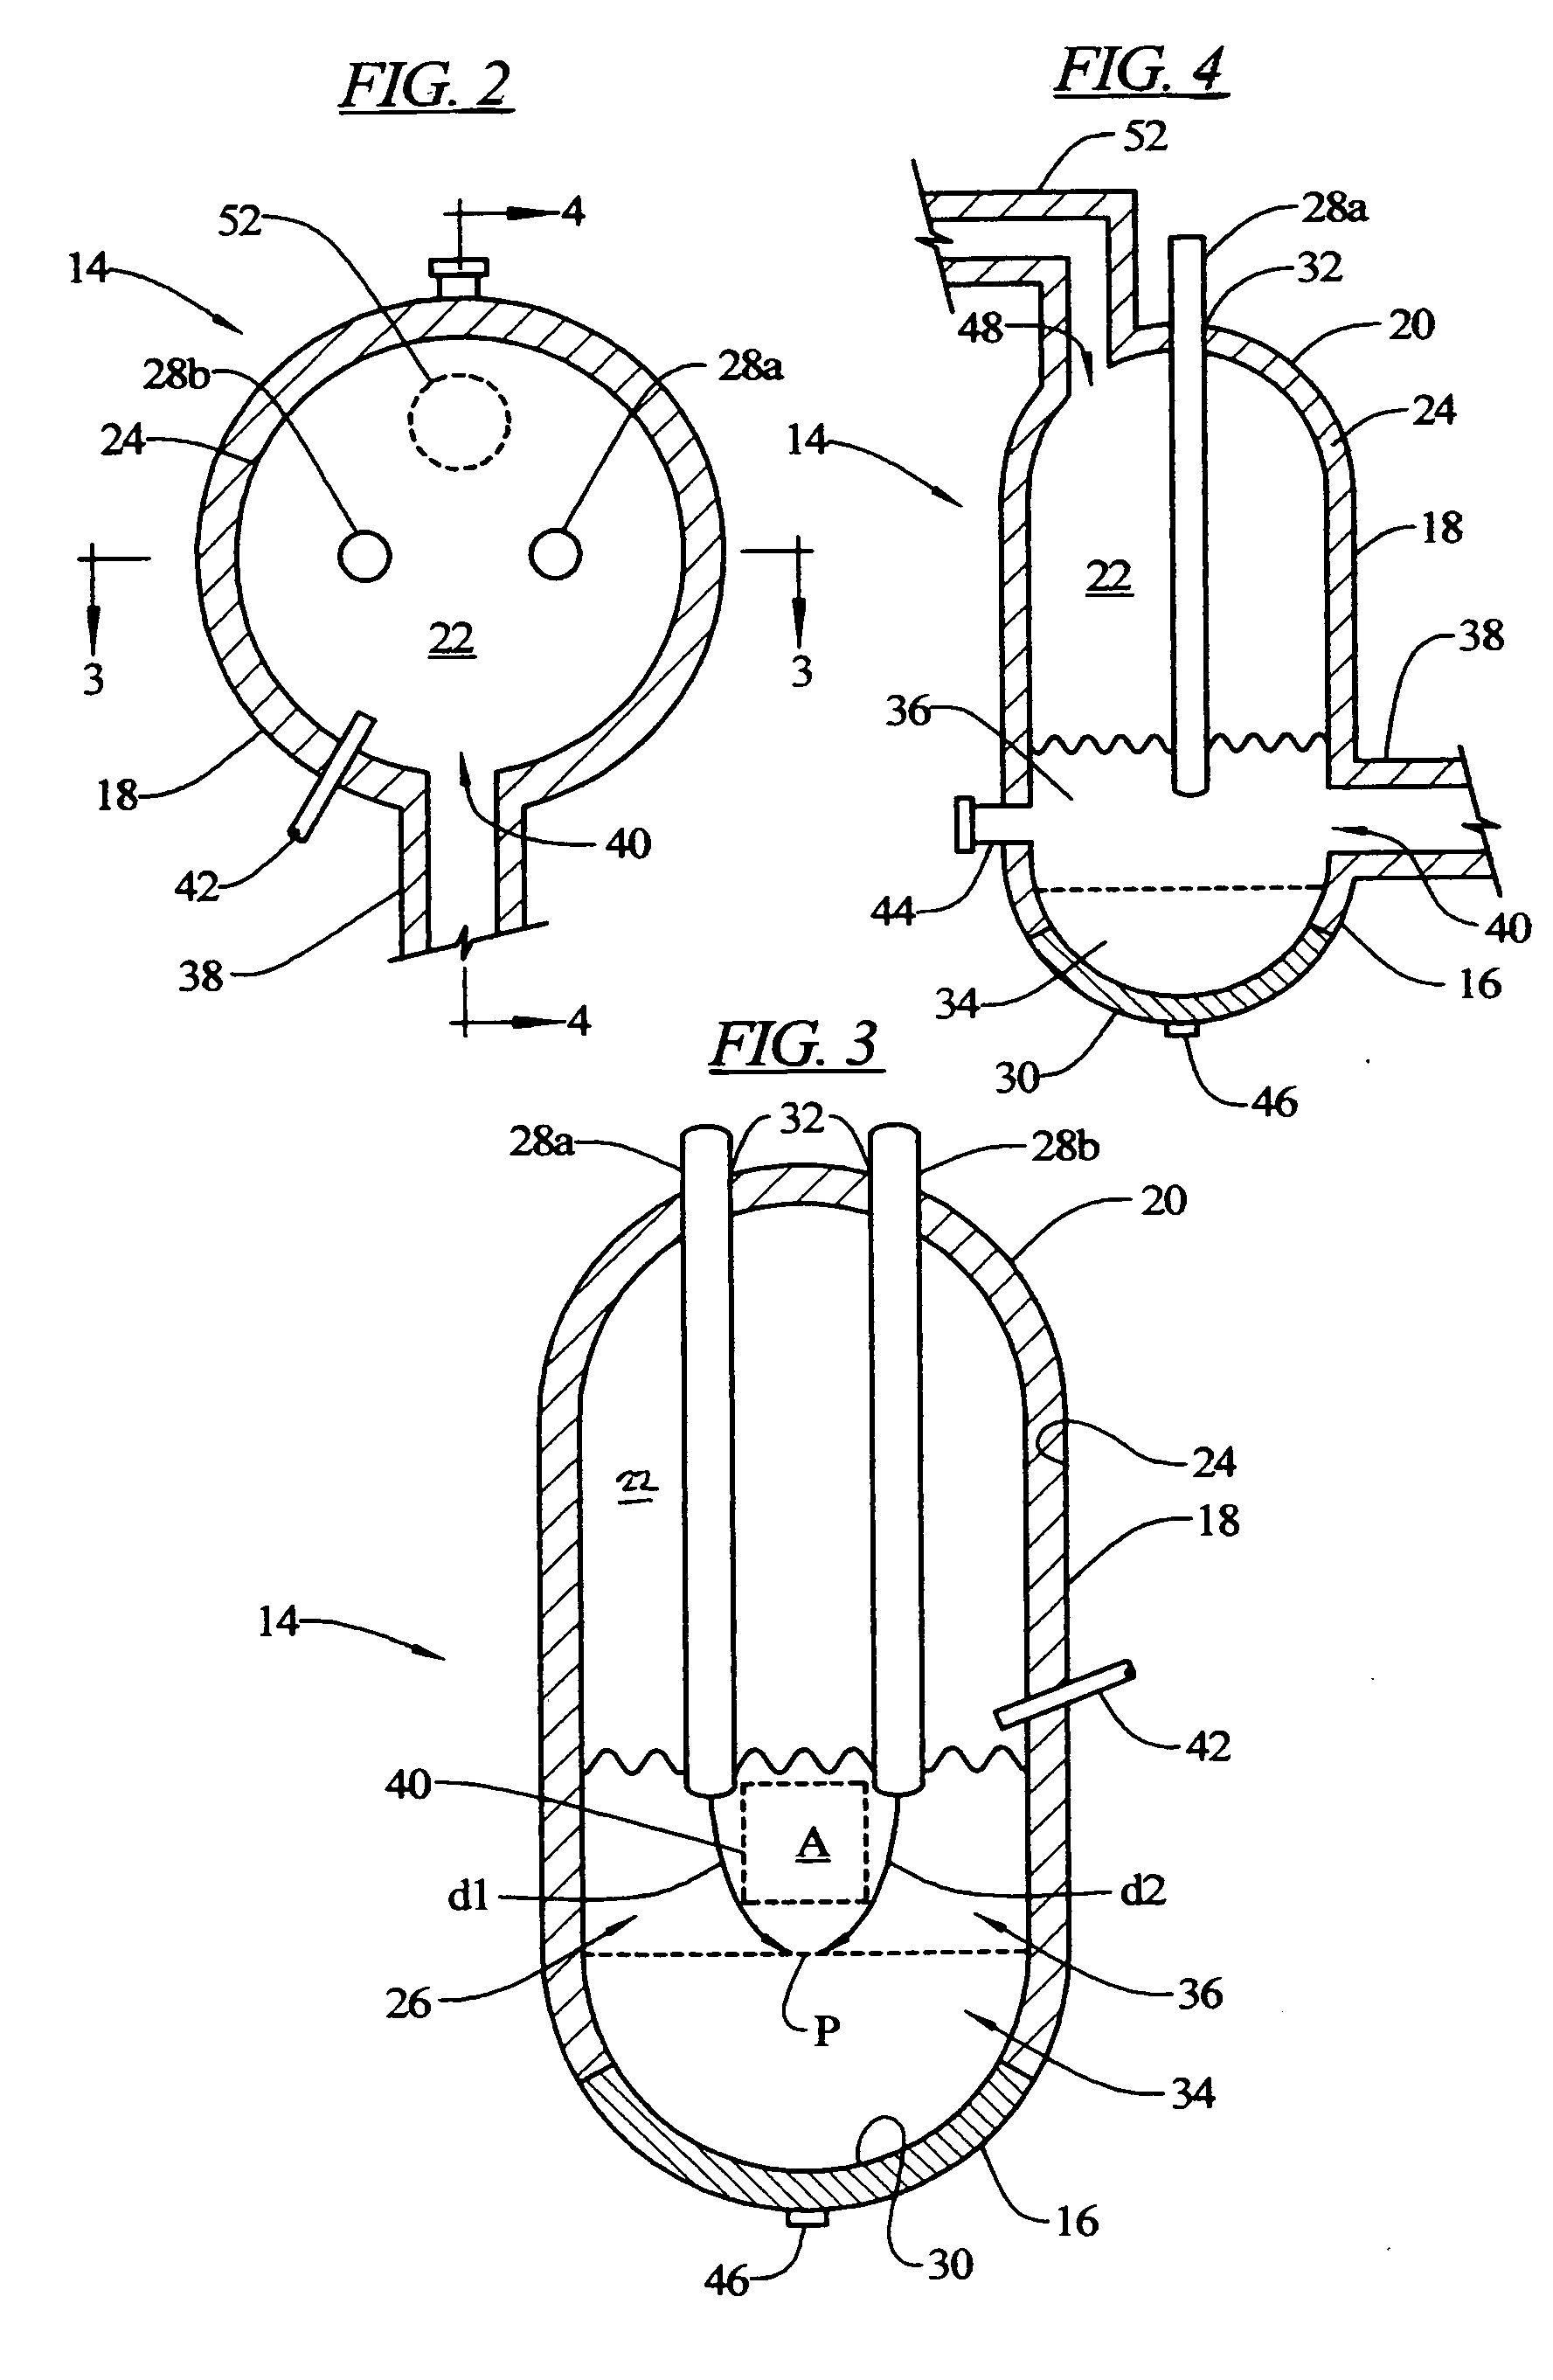 Method and apparatus for plasma gasification of waste materials